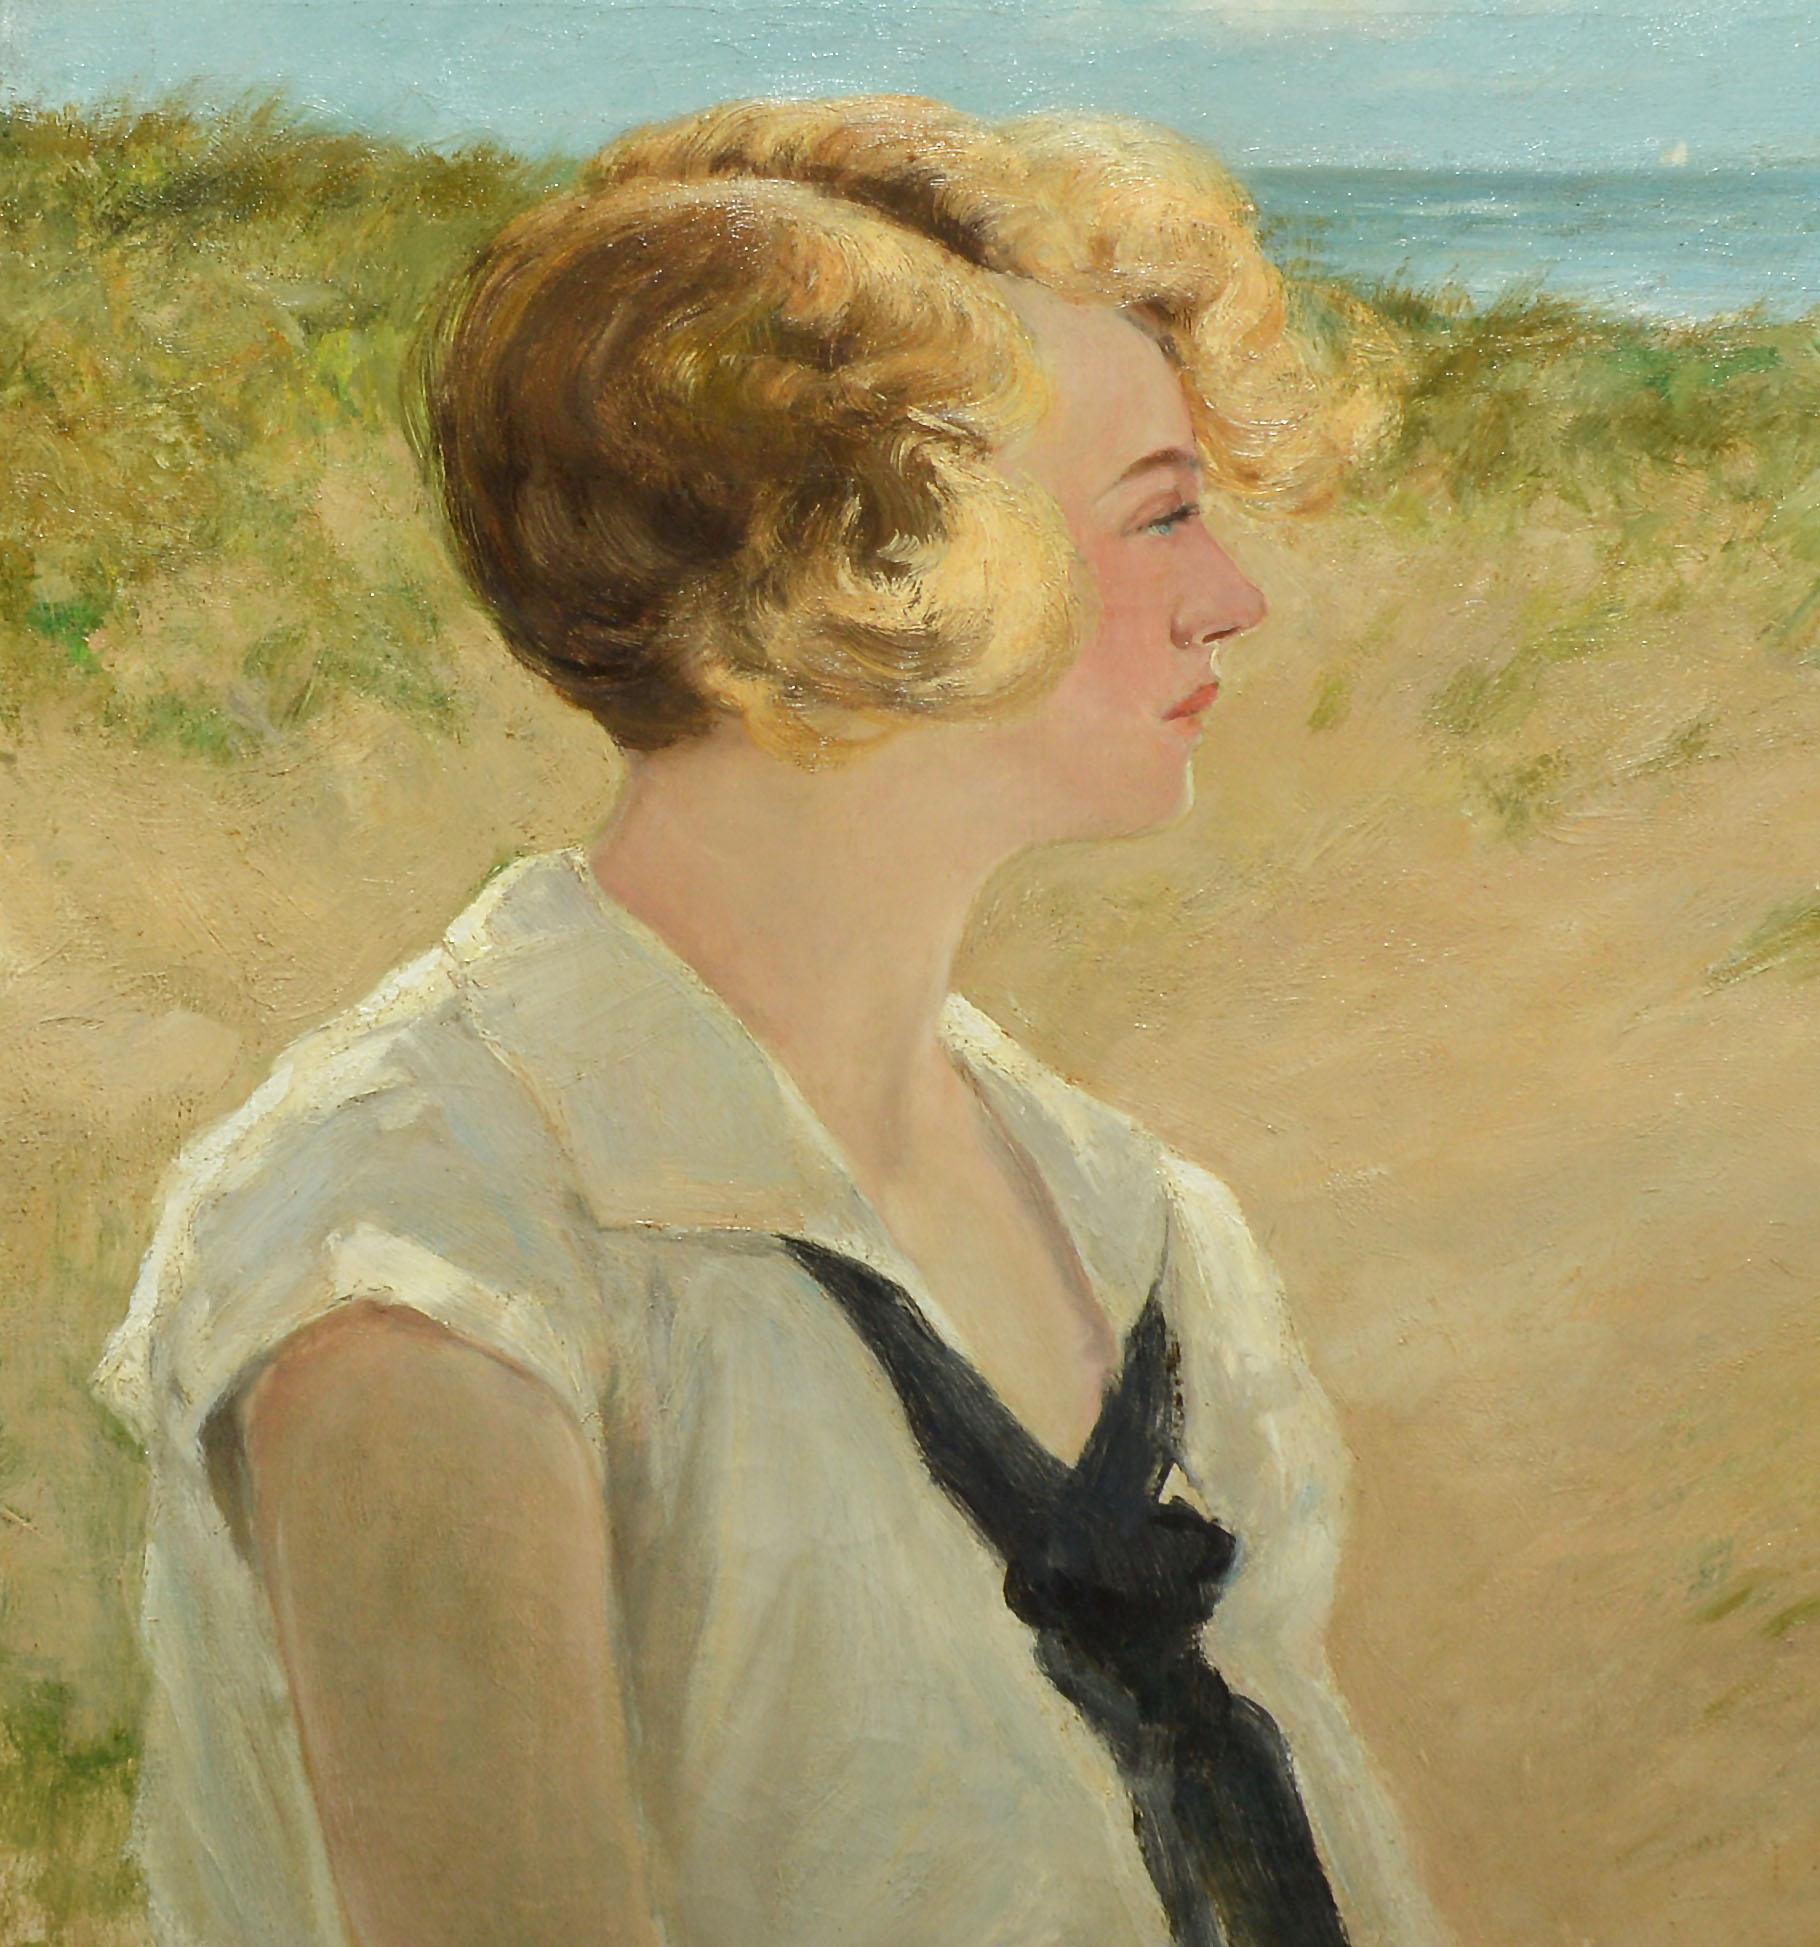 Antique American impressionist painting of a young woman near the beach by Charles Paul Gruppe  (1860 - 1940).  Oil on canvas, circa 1910.  Signed.  Displayed in a giltwood frame.  Image, 20